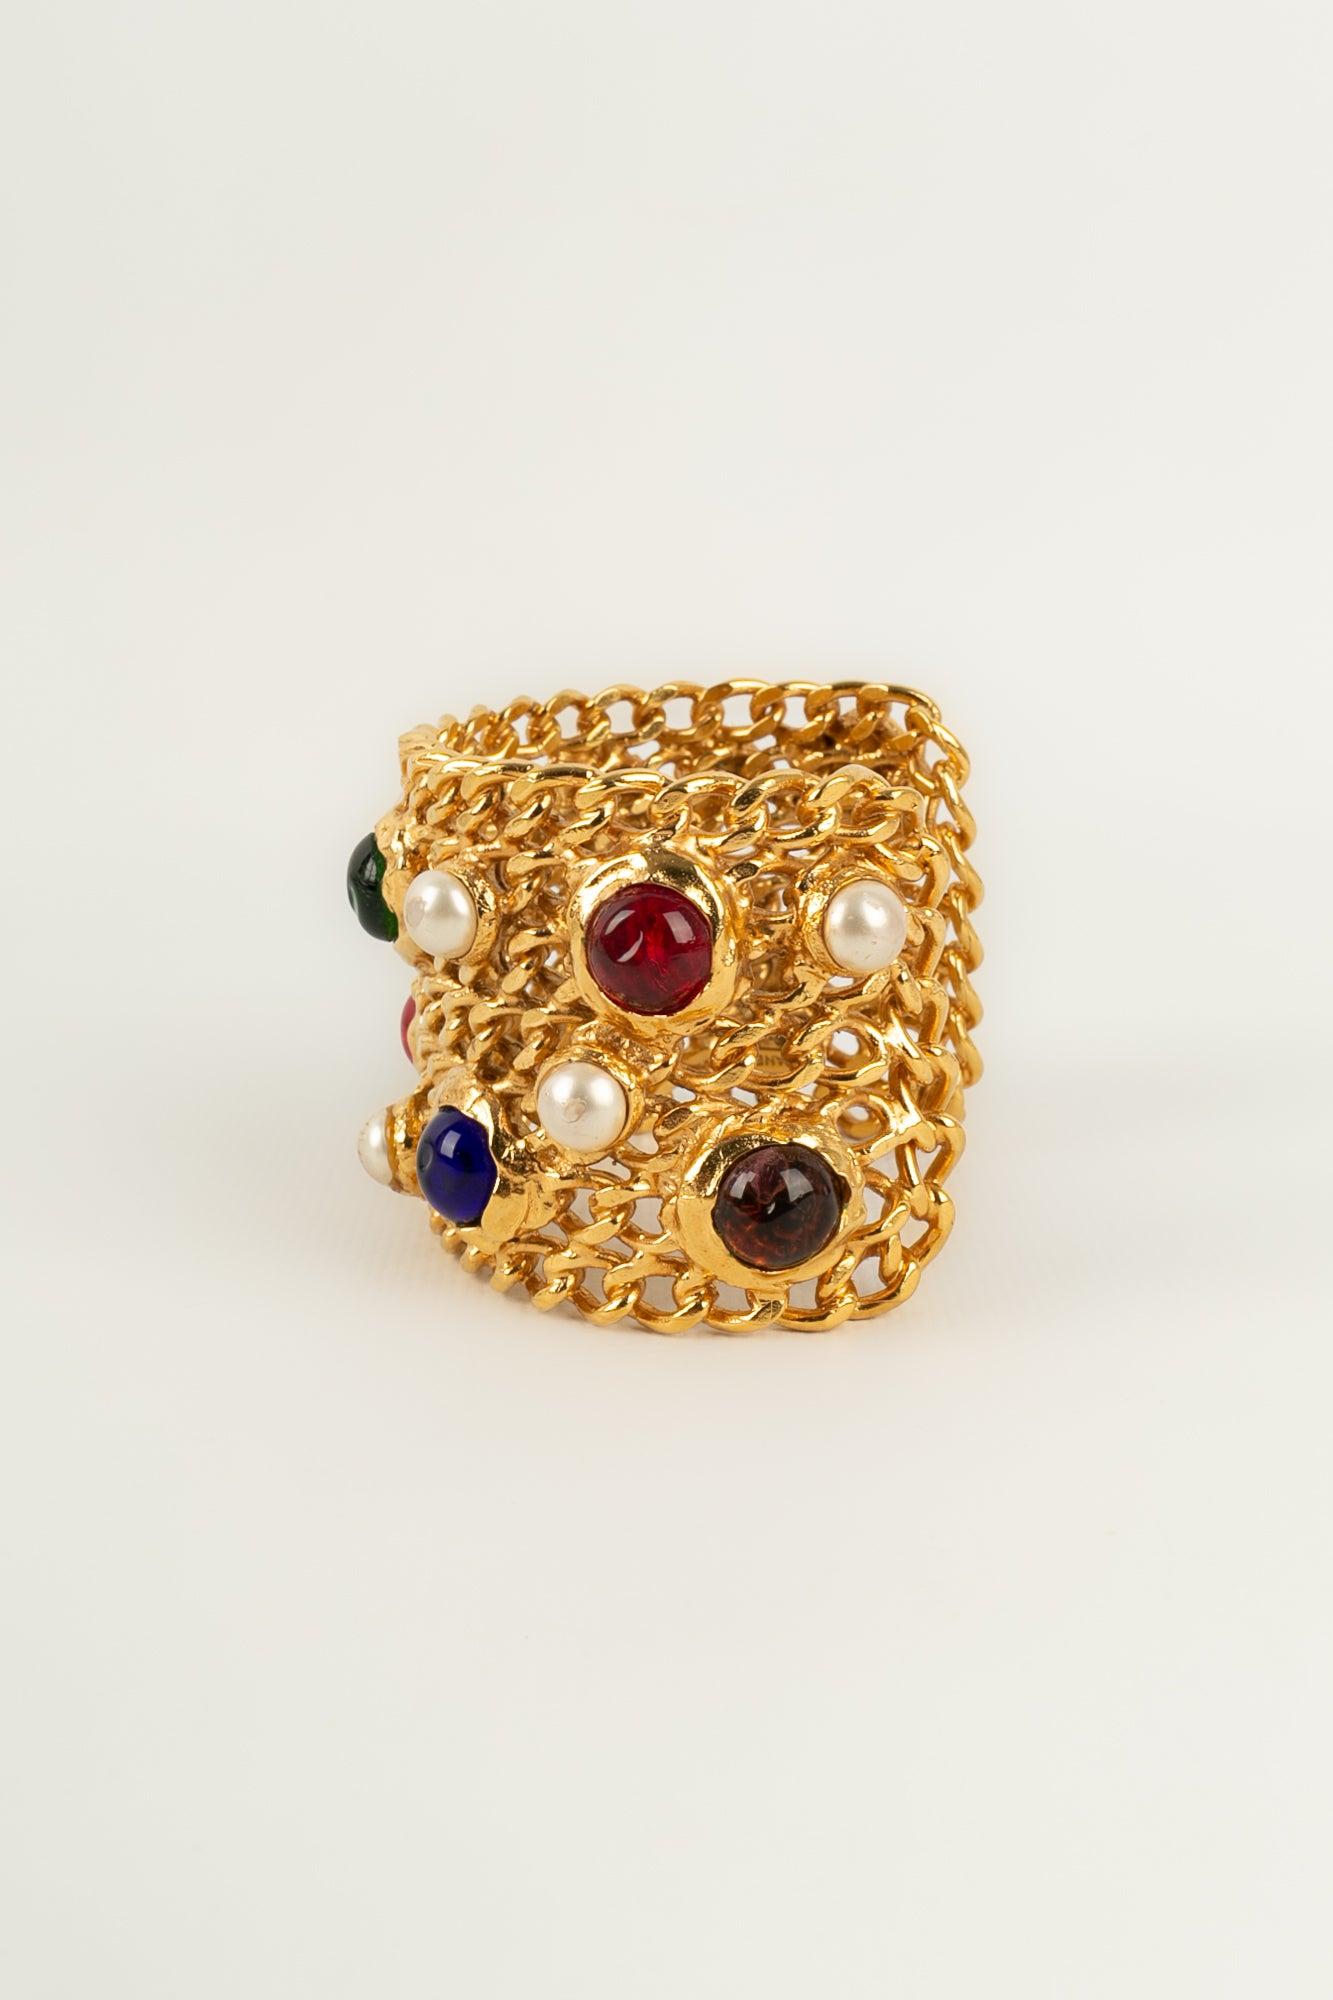 Chanel Cuff Bracelet in Golden Metal with Cabochons In Excellent Condition For Sale In SAINT-OUEN-SUR-SEINE, FR